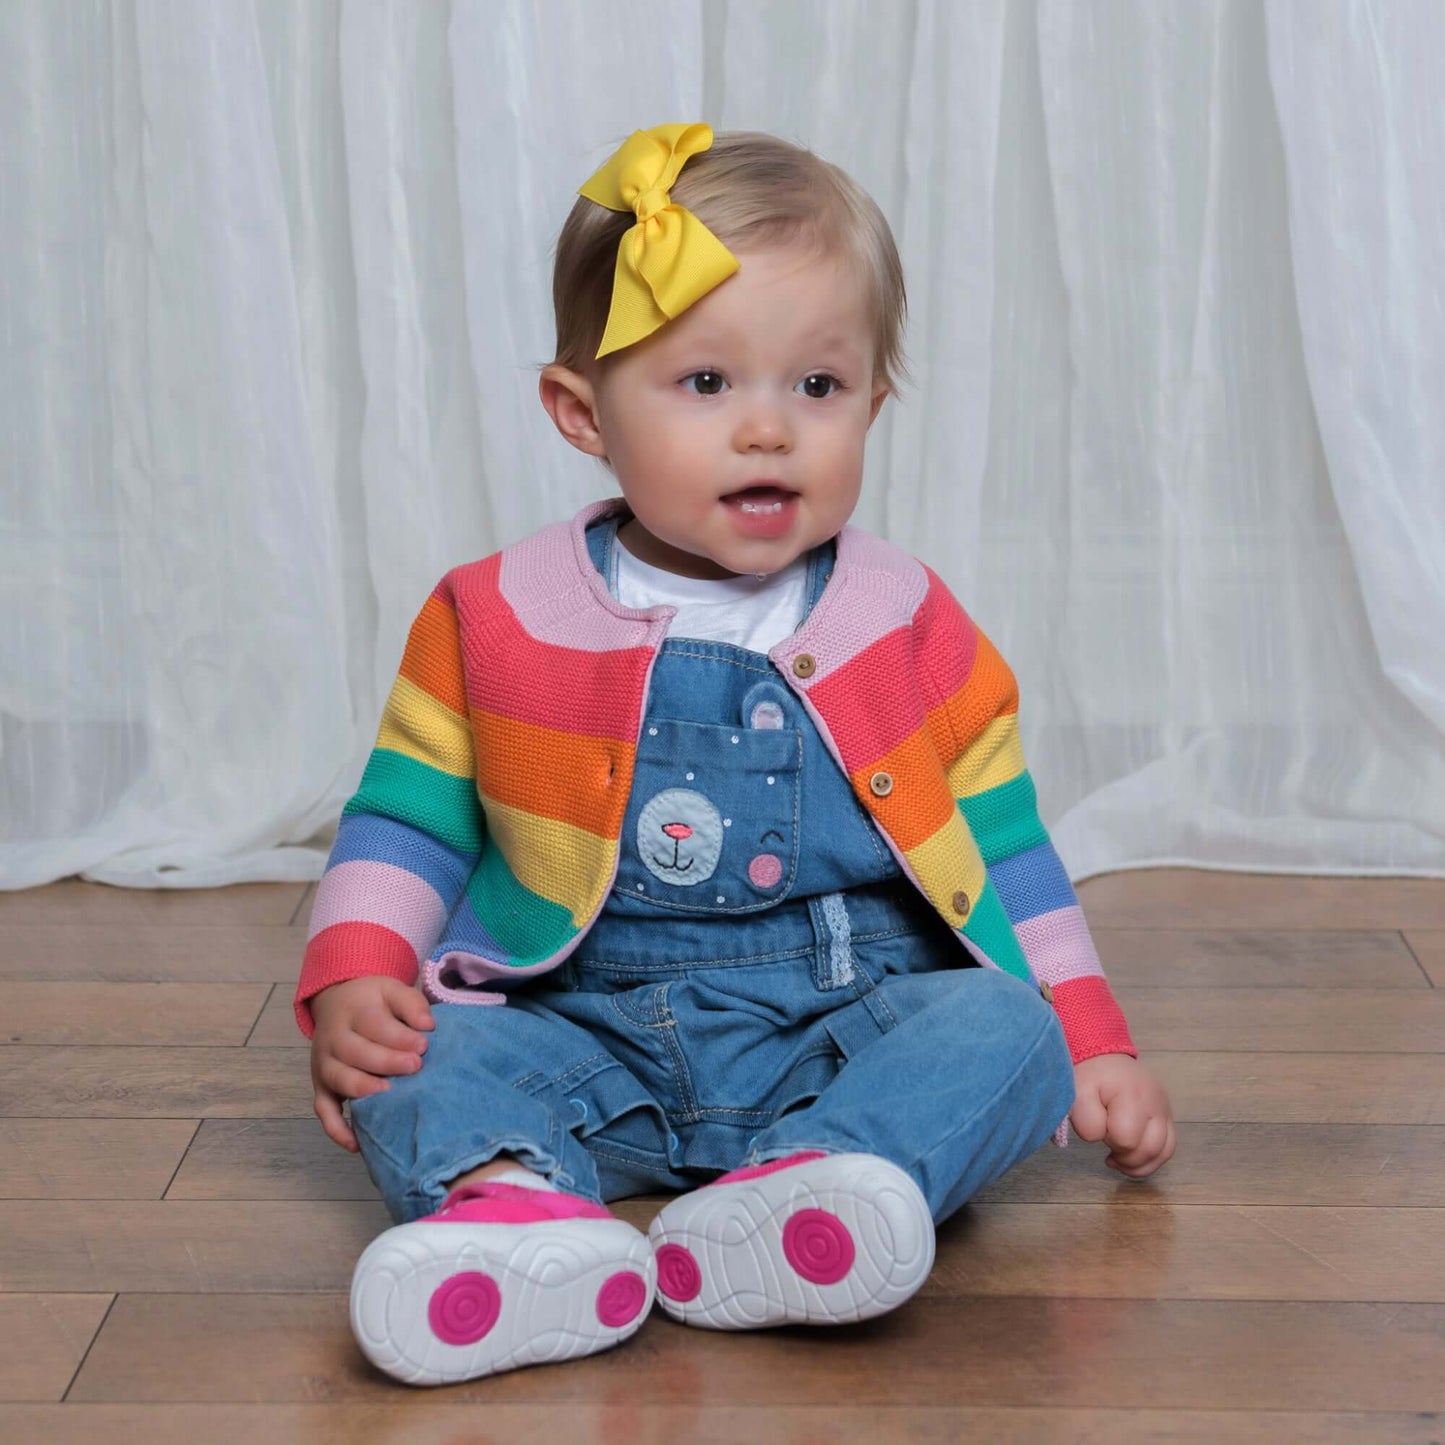 Toddler girl wearing a yellow bow clip, rainbow cardigan, and denim overalls, sitting on wooden floor